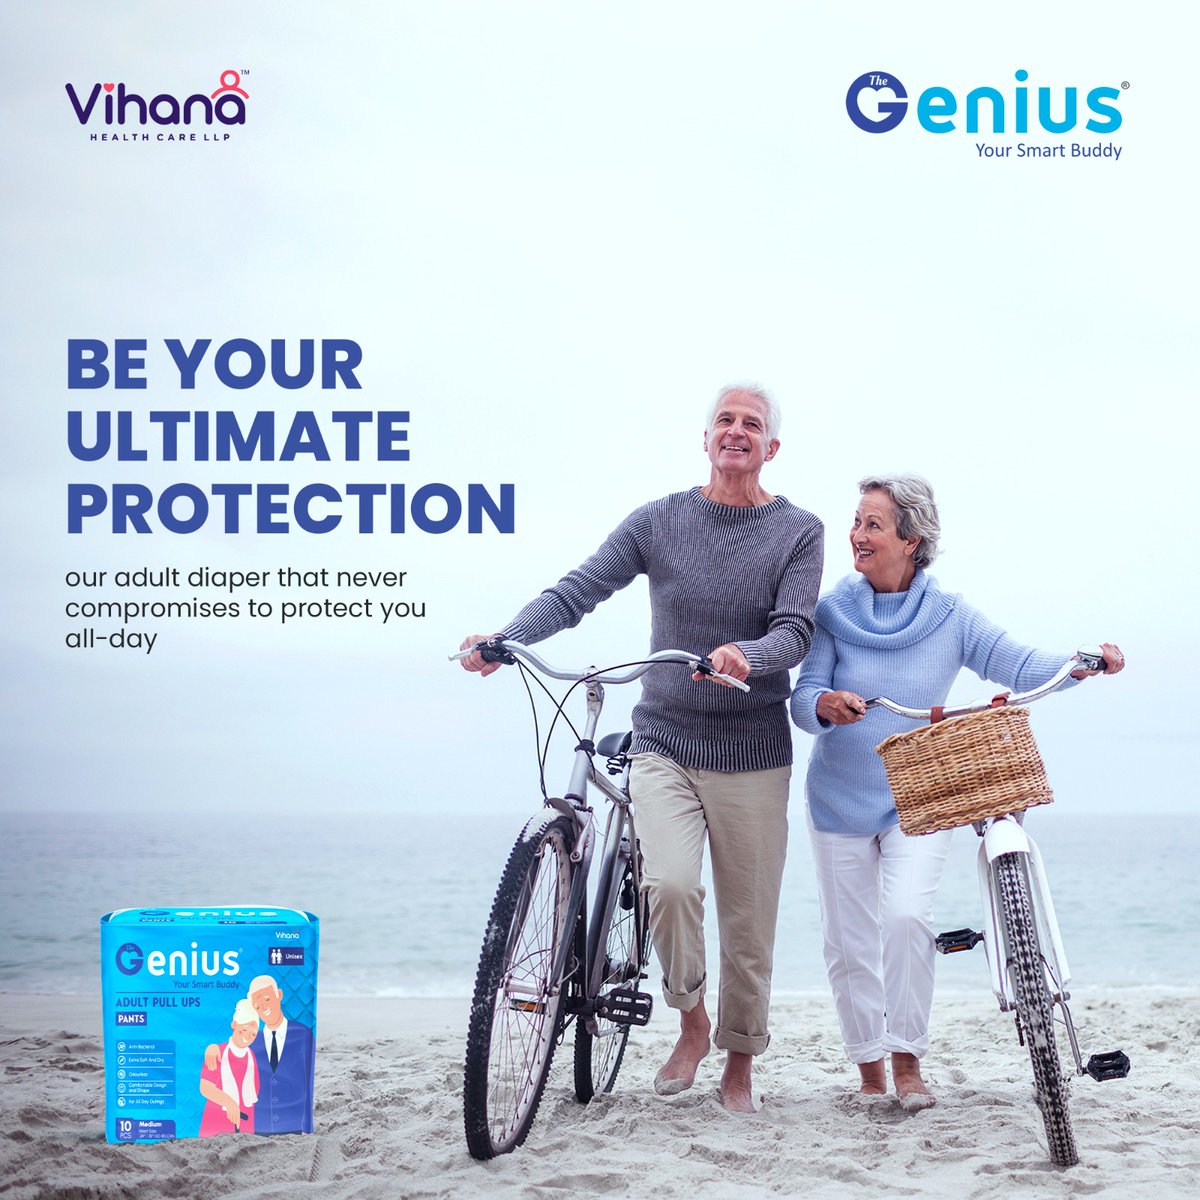 Be Your Ultimate Protection Our Adult Diaper that Never Compromise to Protect You all Day.
.
#adultdiapers #incontinenceproducts #adultpants #diaperbriefs #seniorcare #elderlycare #incontinenceissues #bladderleakage #diaperlover #urinaryincontinence #incontinencesupport #depend